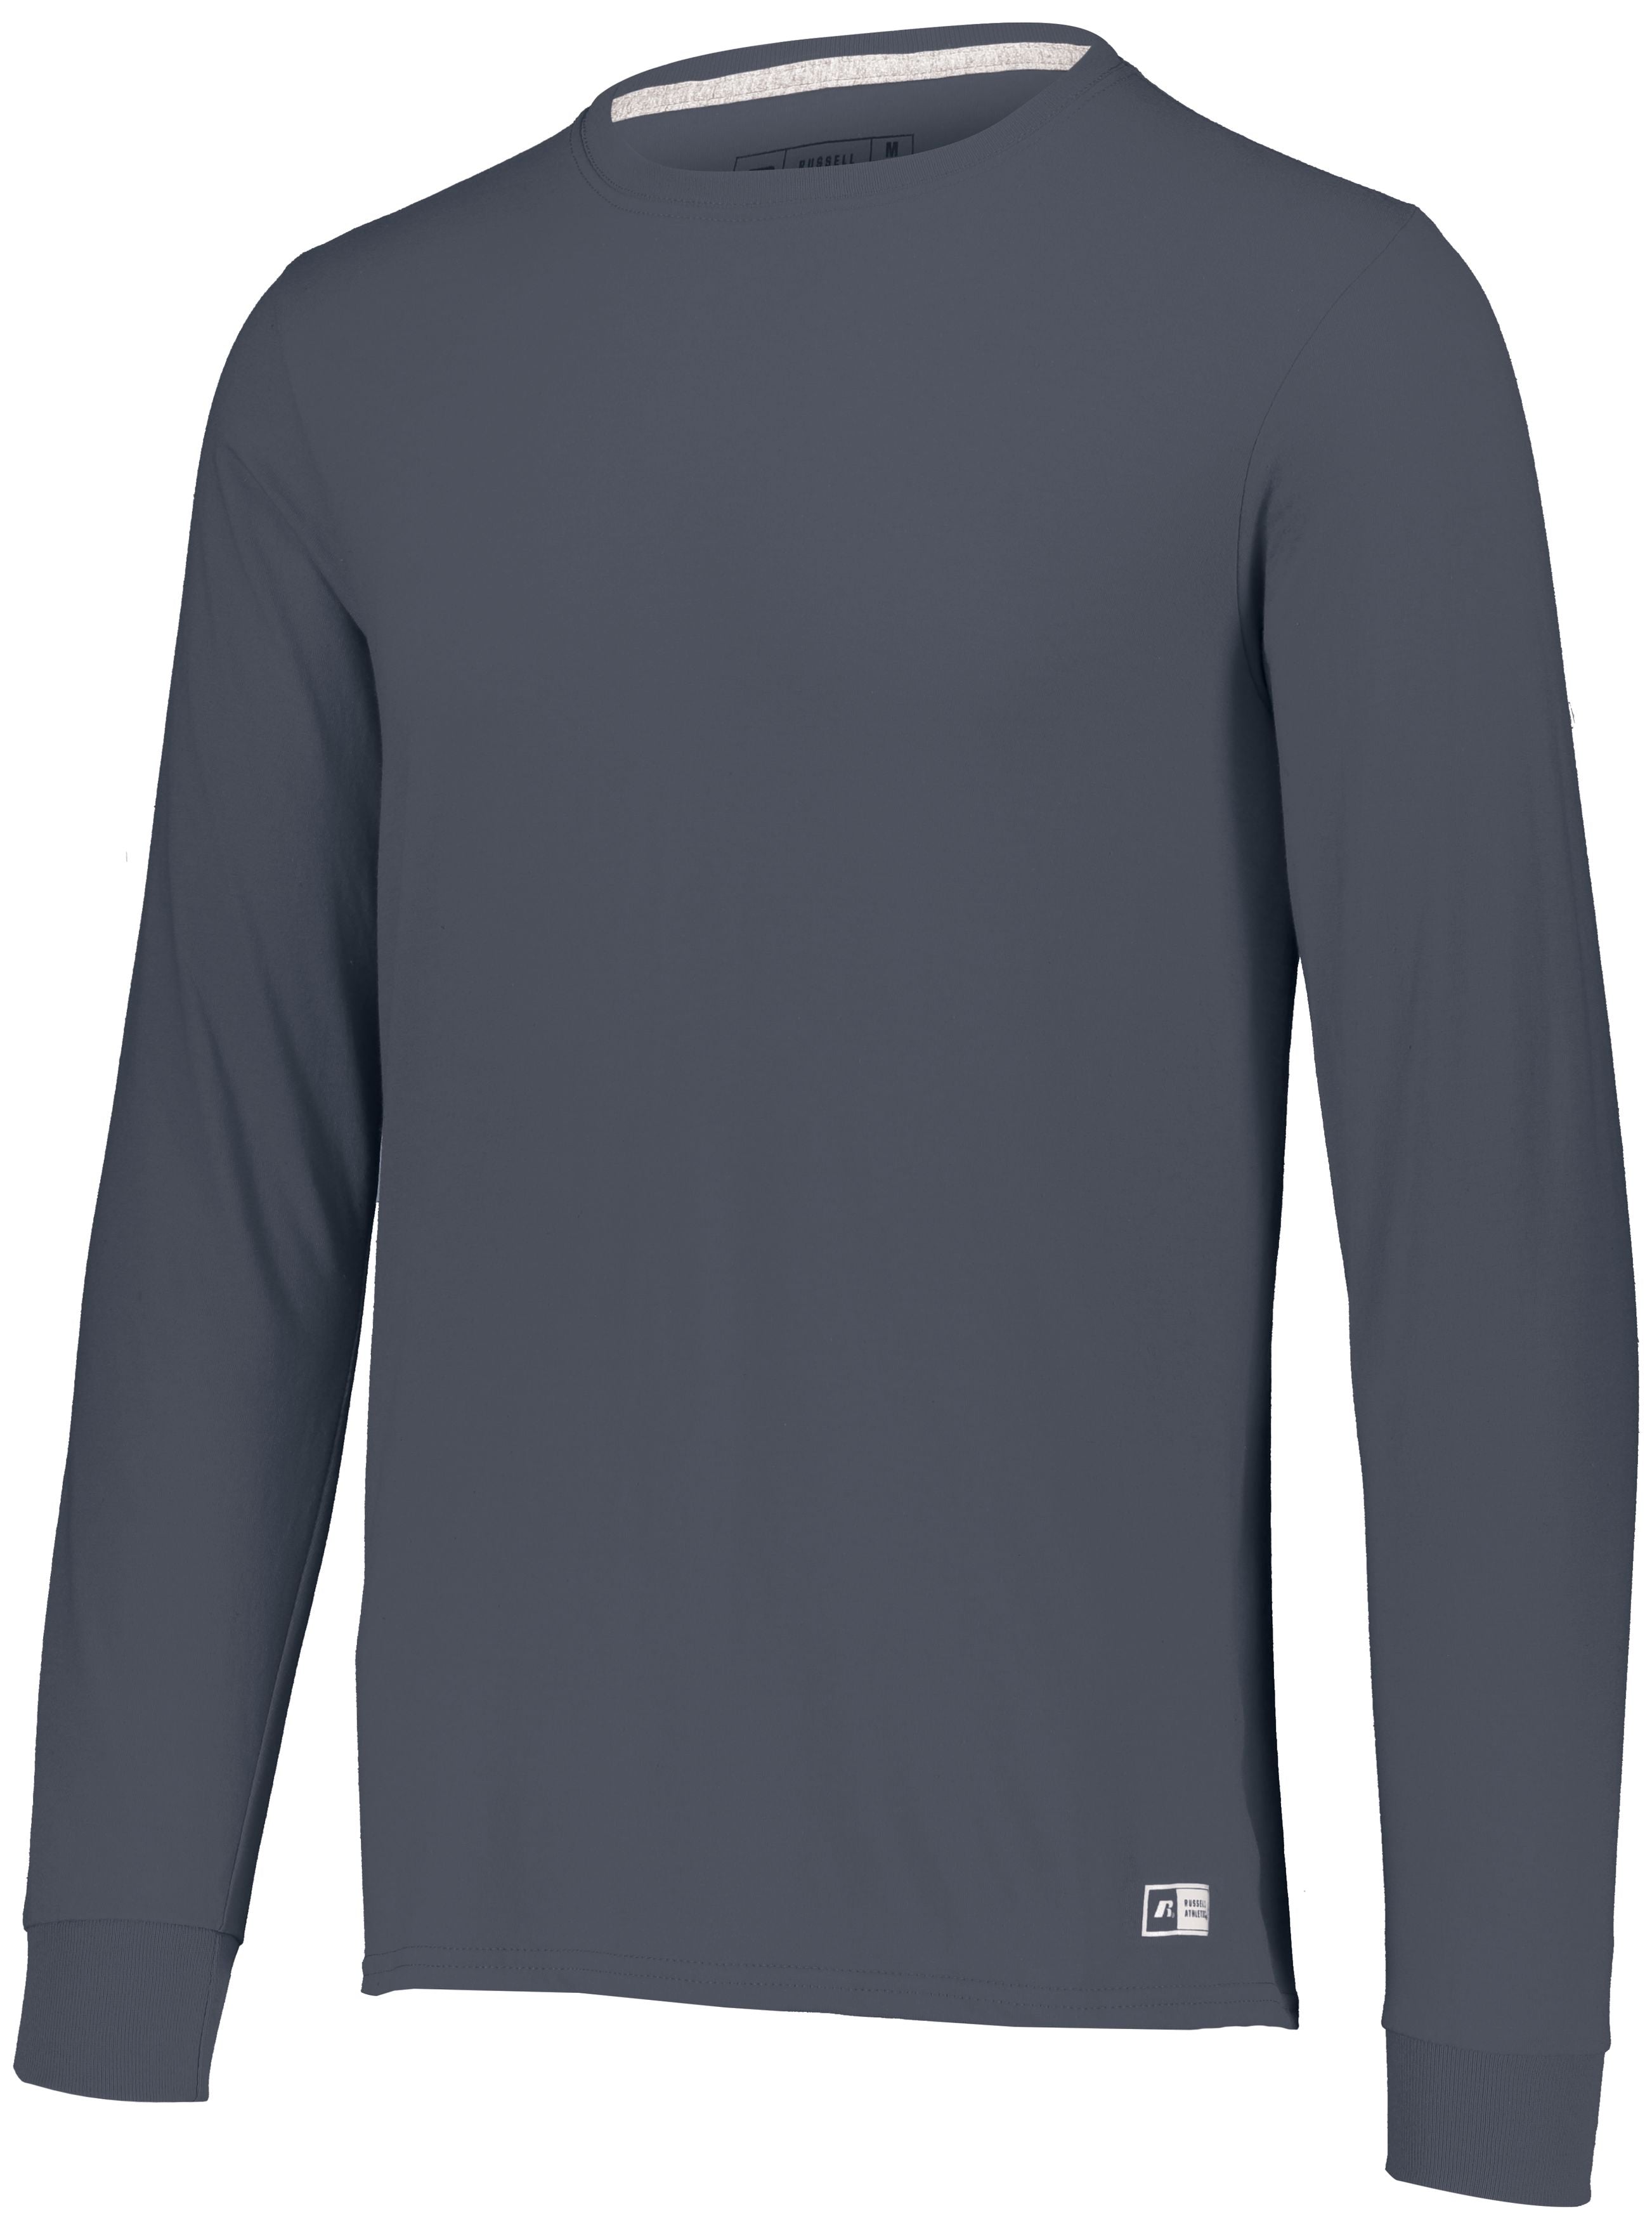 Russell Athletic Essential Long Sleeve Tee in Black Heather  -Part of the Adult, Adult-Tee-Shirt, T-Shirts, Russell-Athletic-Products, Shirts product lines at KanaleyCreations.com